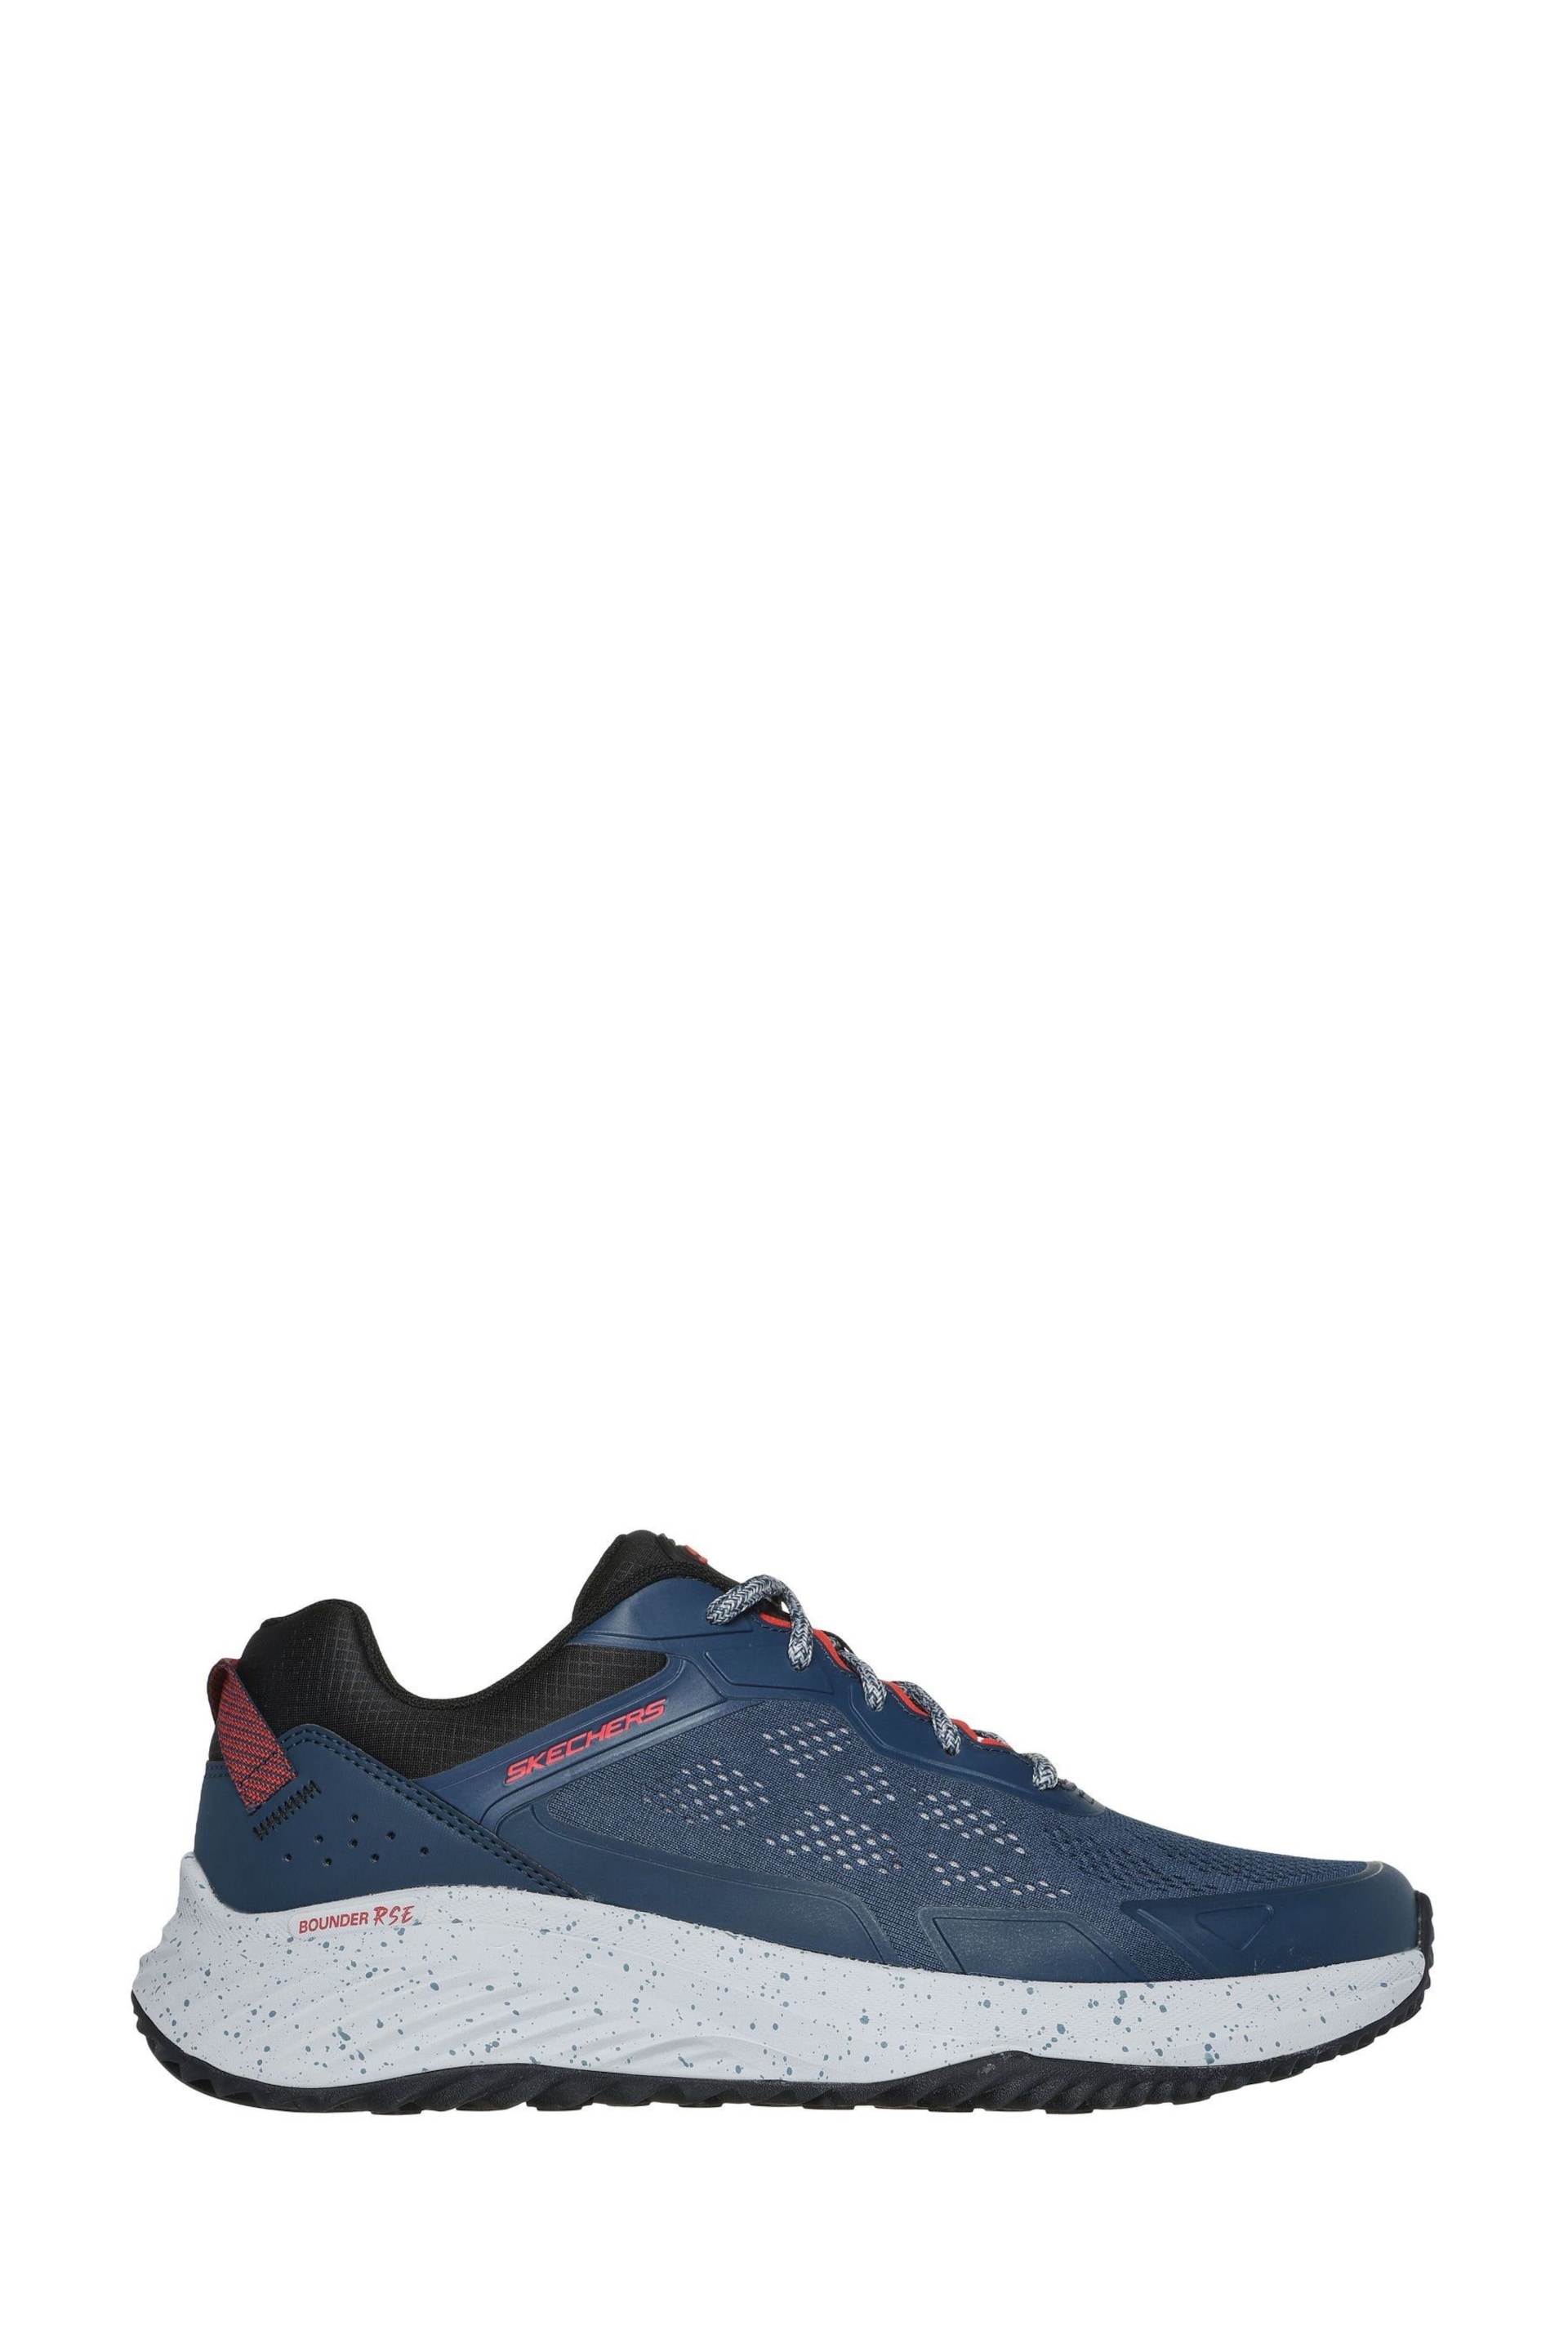 Skechers Blue Bounder Trainers - Image 1 of 4